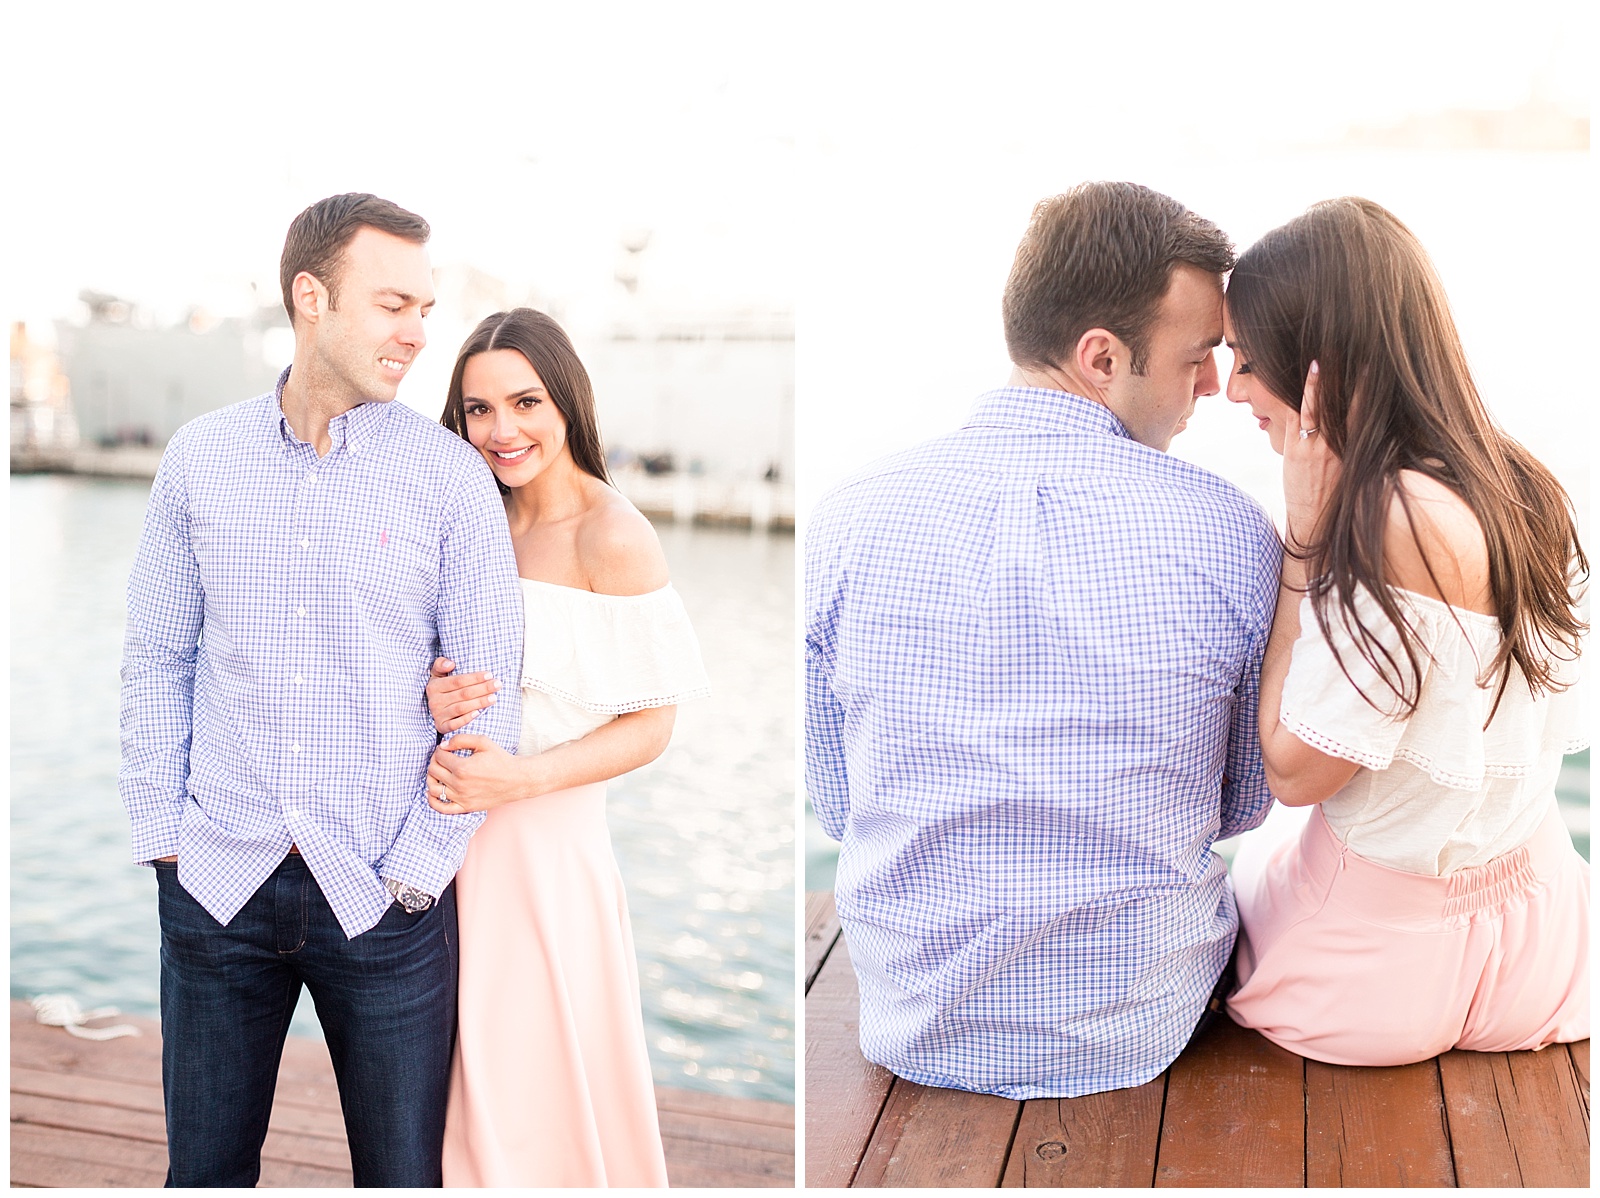 baltimore, wedding, photographer, baltimore wedding photographer, engagement session, fells point, romantic, waterfront, brick wall, industrial ,engaged, natural light, golden hour, spring, fall, candid, outdoors, travel, rustic, nature, love, cute, happy, waterfront, maryland wedding photographer, maryland